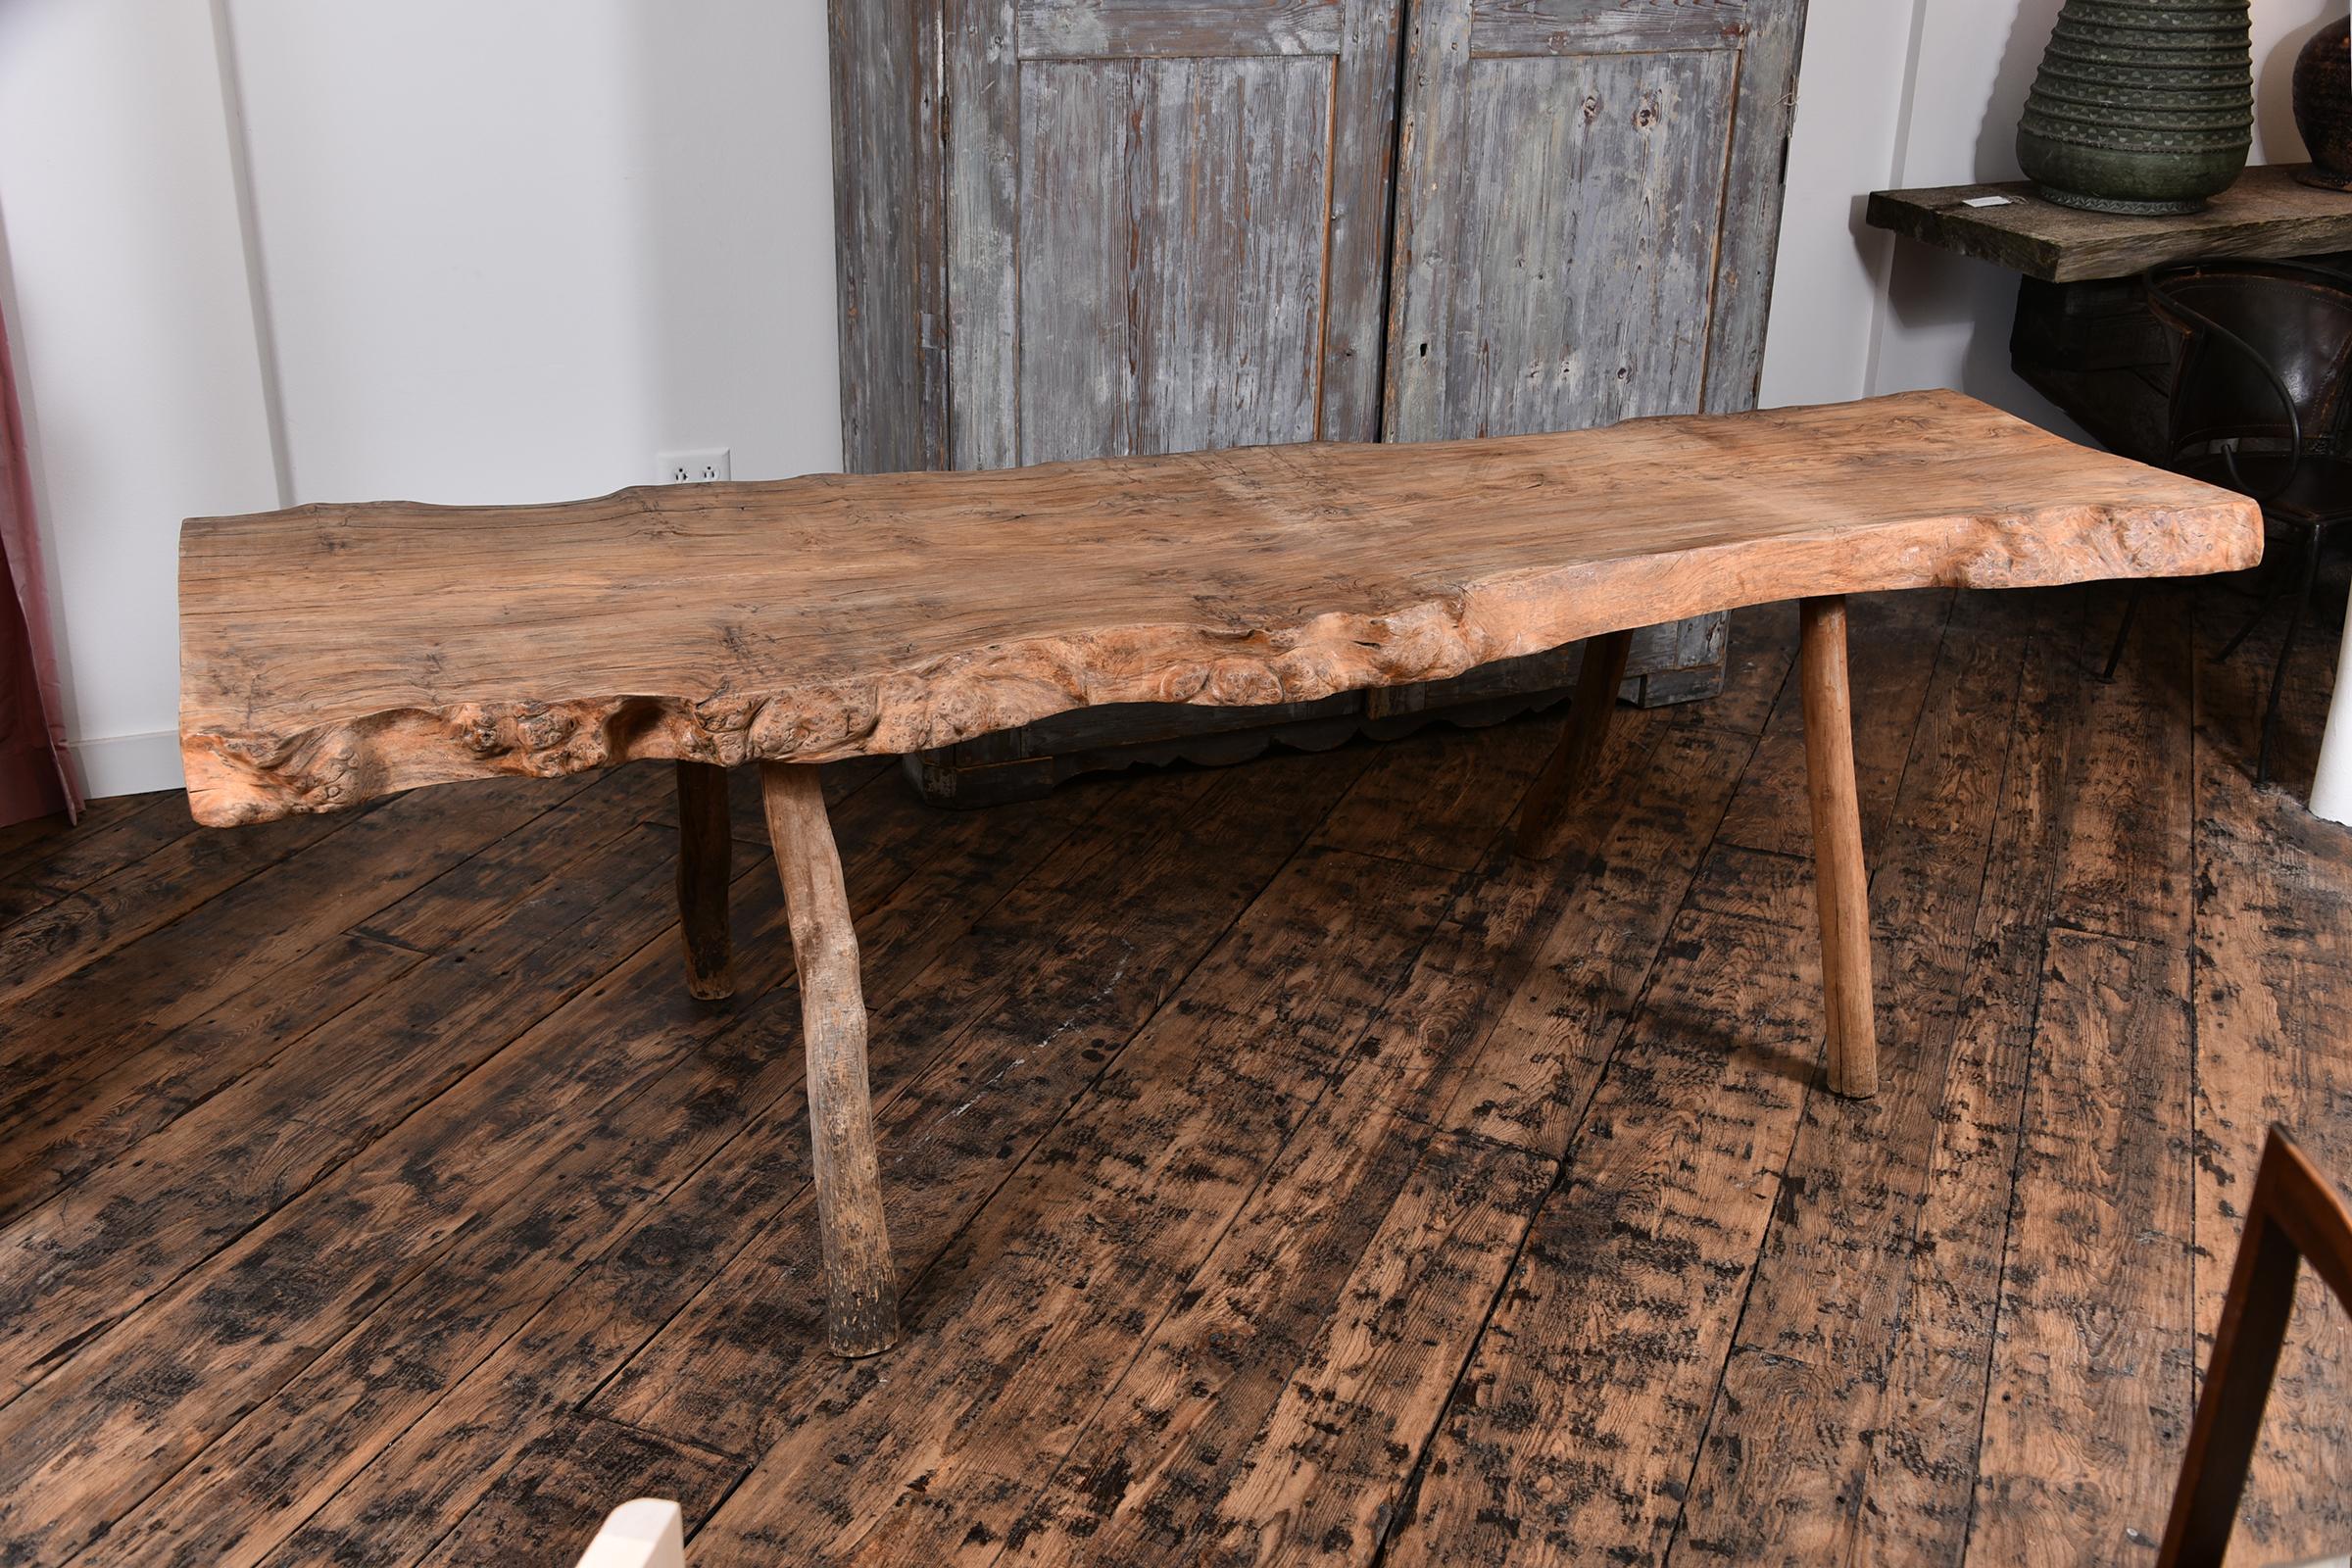 19th century French Primitive table with live edge, could be used as a desk or console.
 